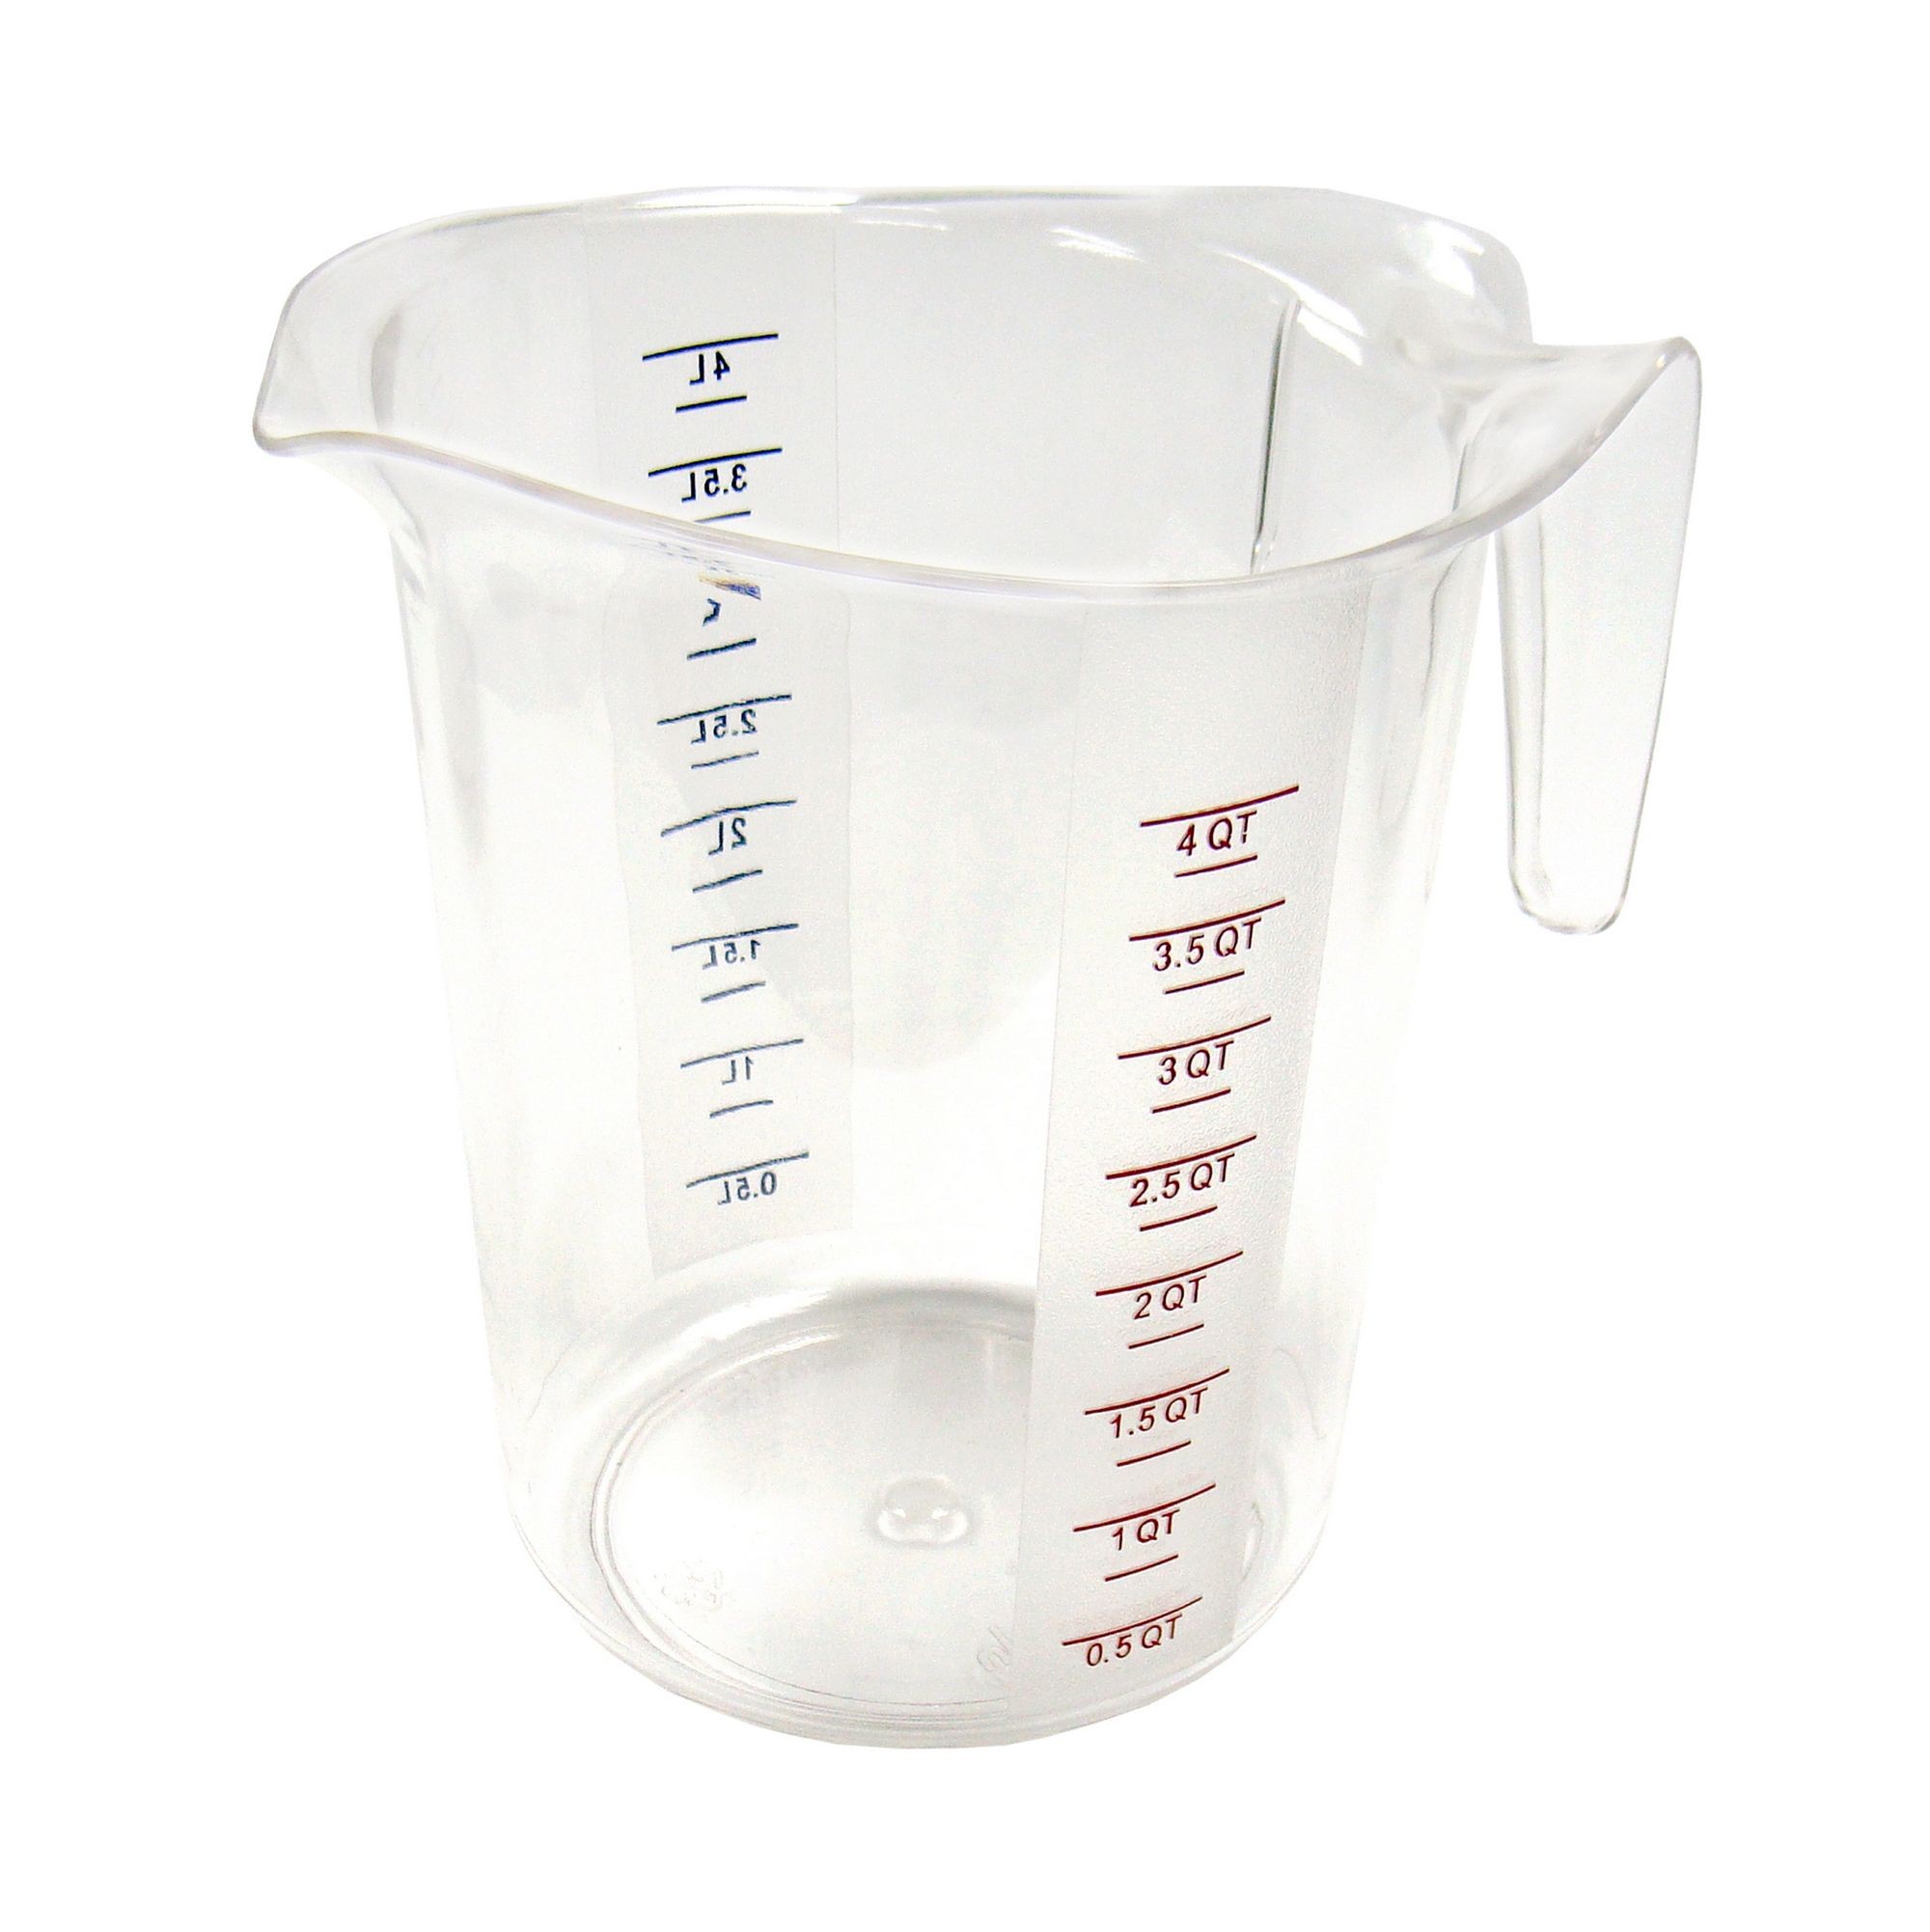 Winco PMCP-400 Polycarbonate 4 Qt. Measuring Cup with Raised External Markings